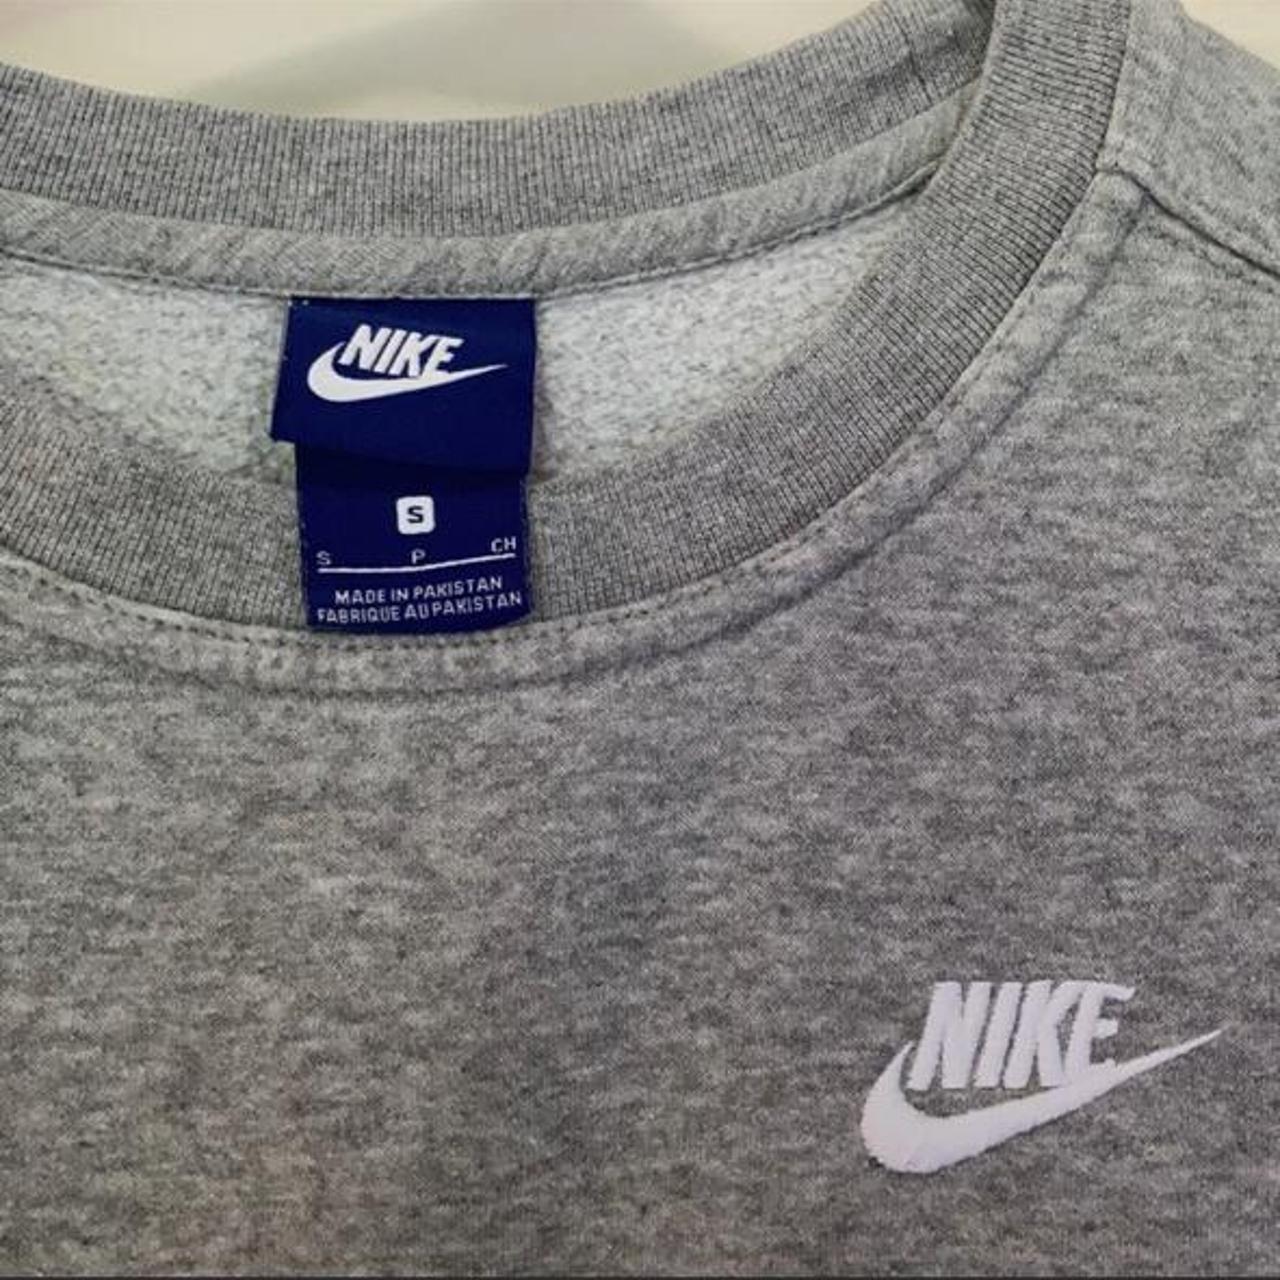 Nike crew sweatshirt There is a small snag on the... - Depop